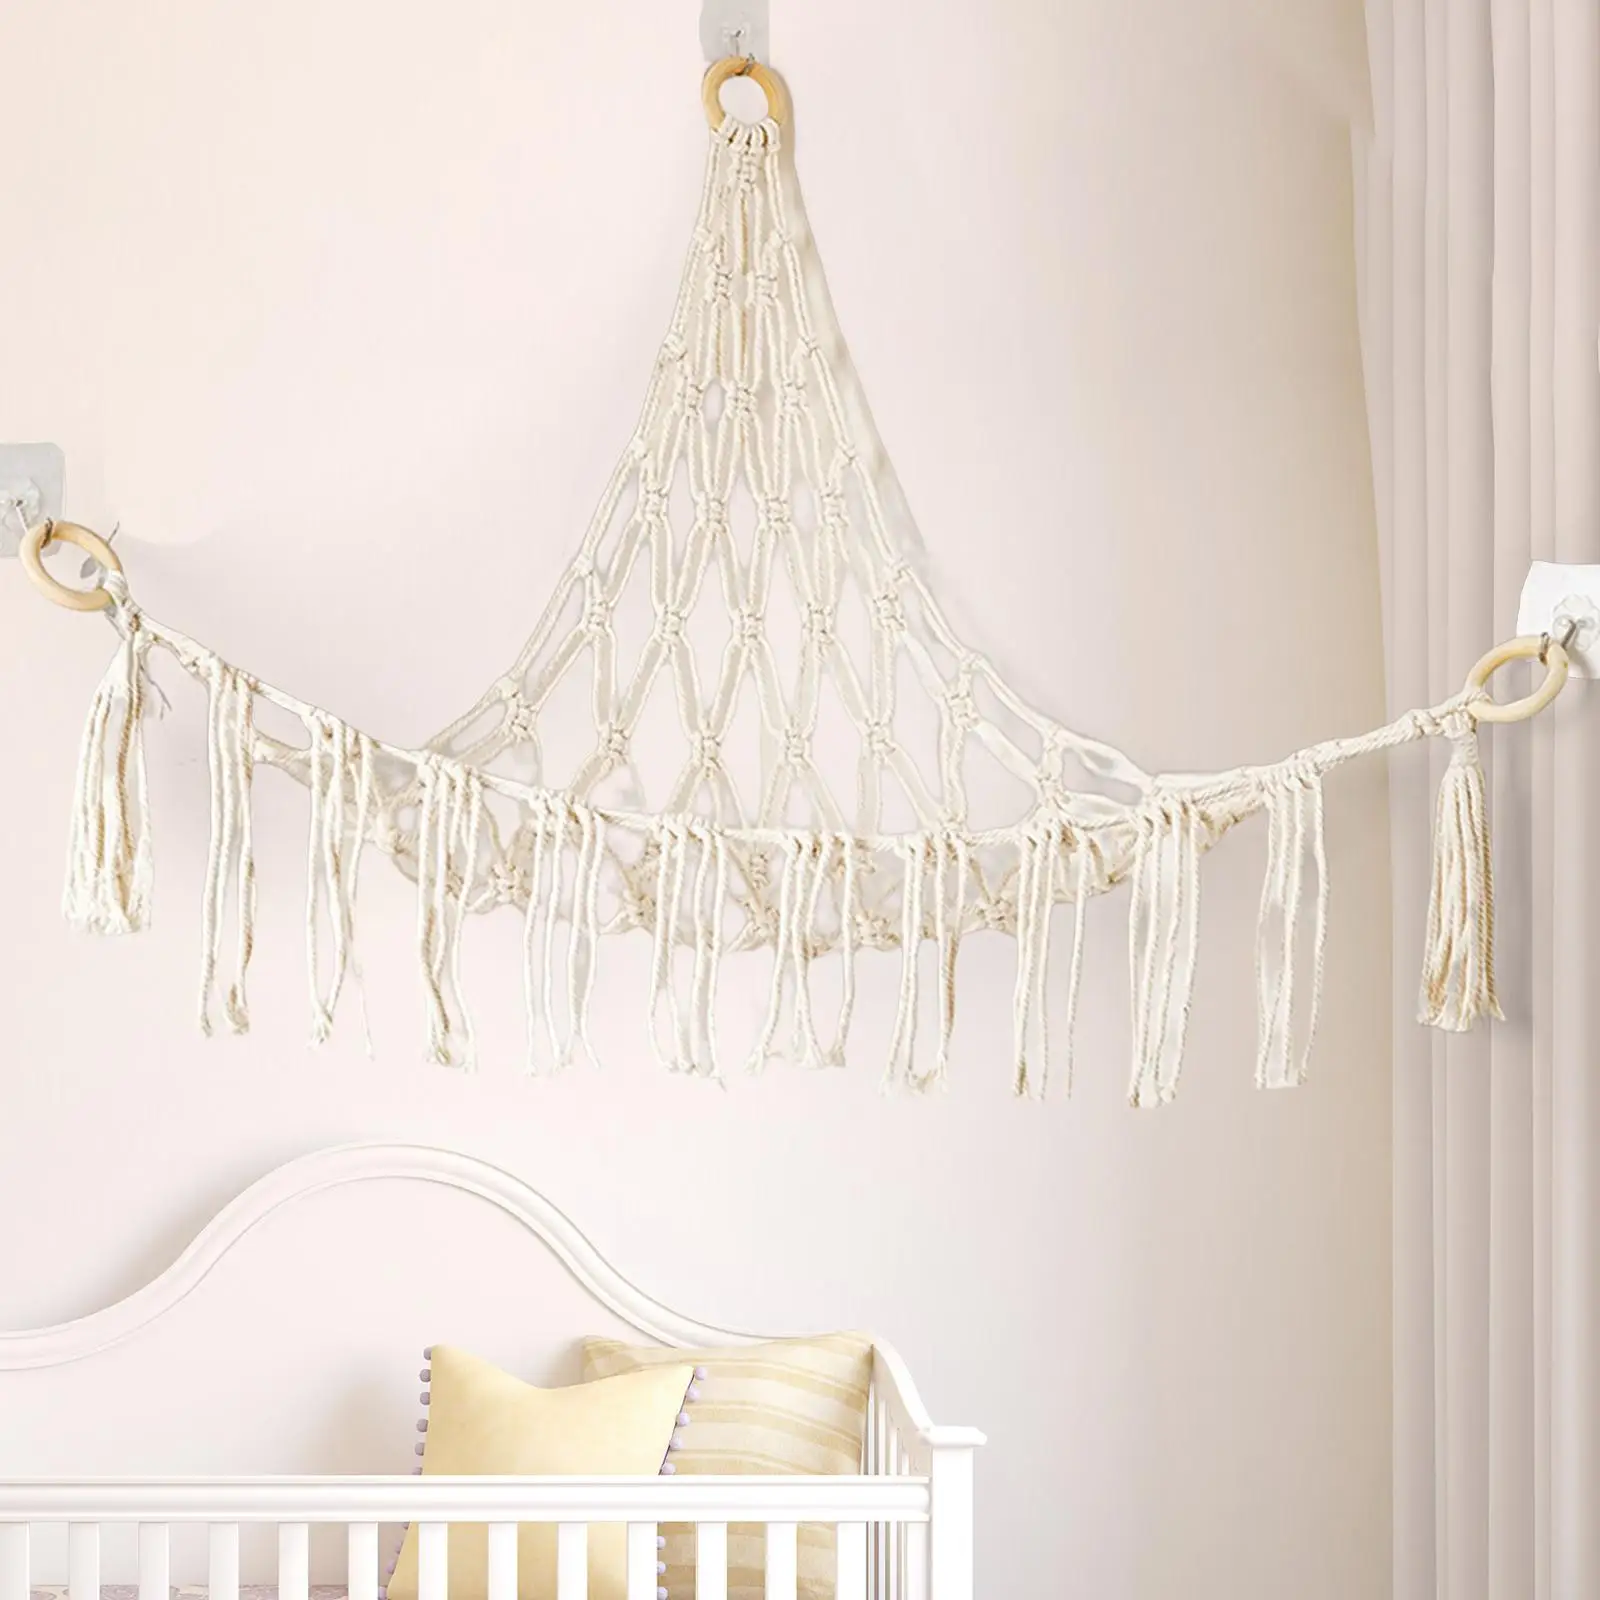 Toy Hammock with Hook Hanging Macrame Stuff for Decoration Holiday Gifts